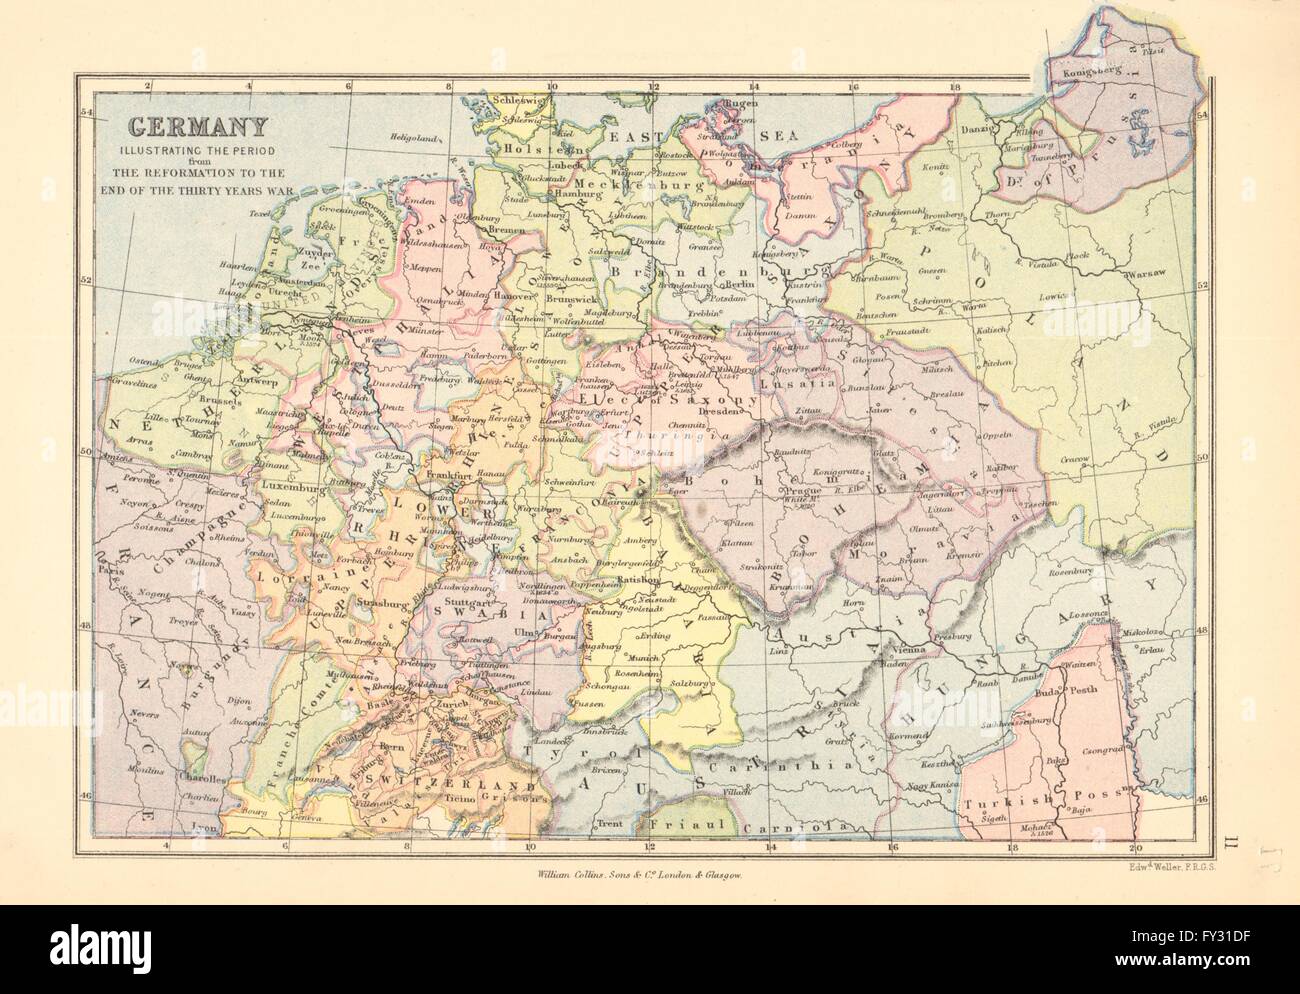 GERMANY. 'From the Reformation to the end of the thirty years war', 1876 map Stock Photo